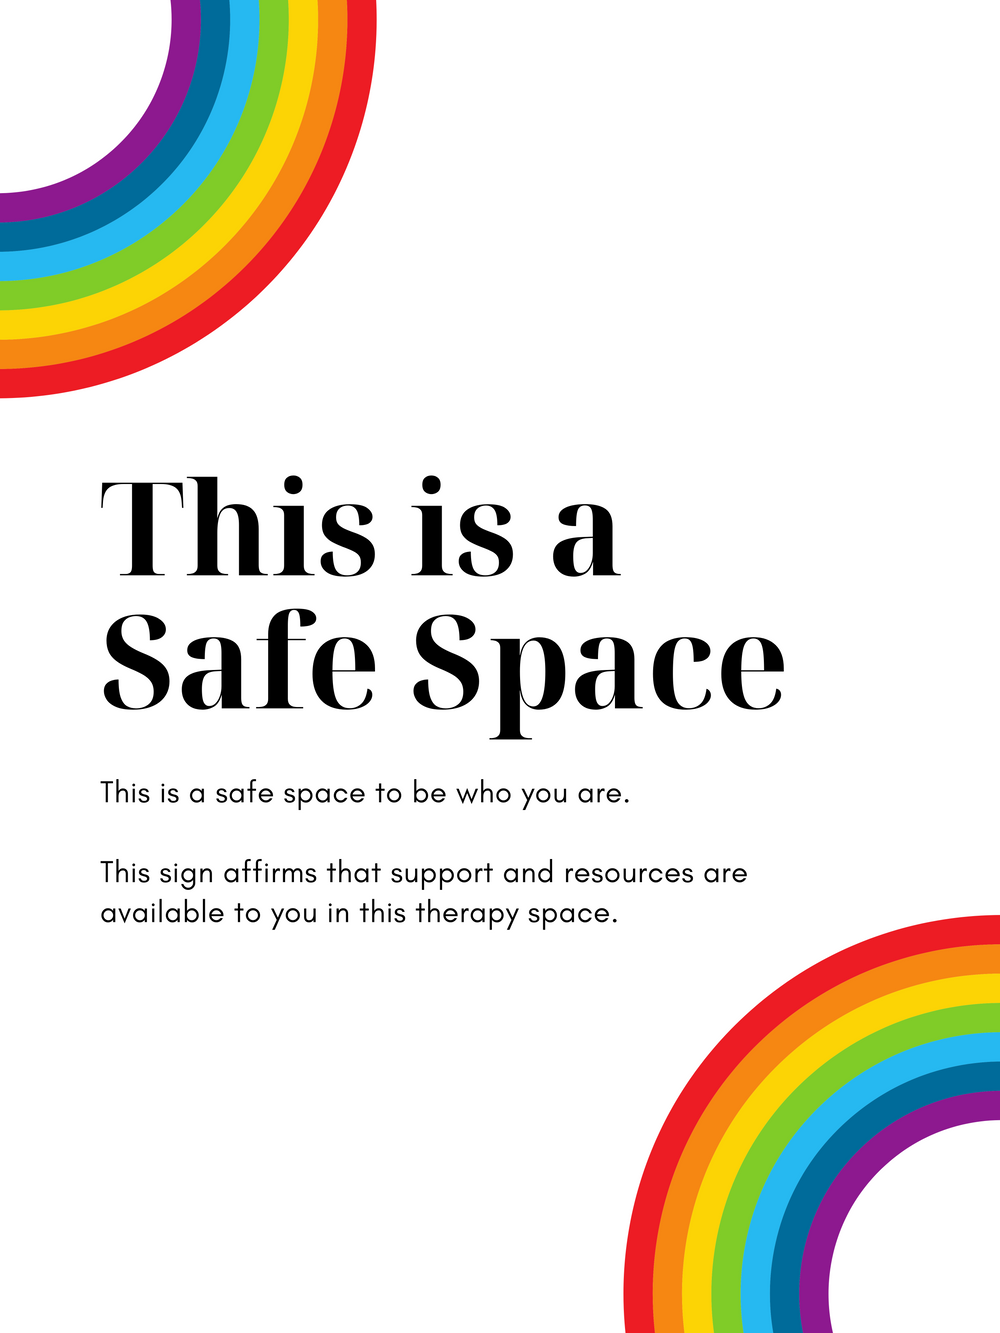 This is a safe space for you to be your authentic self.